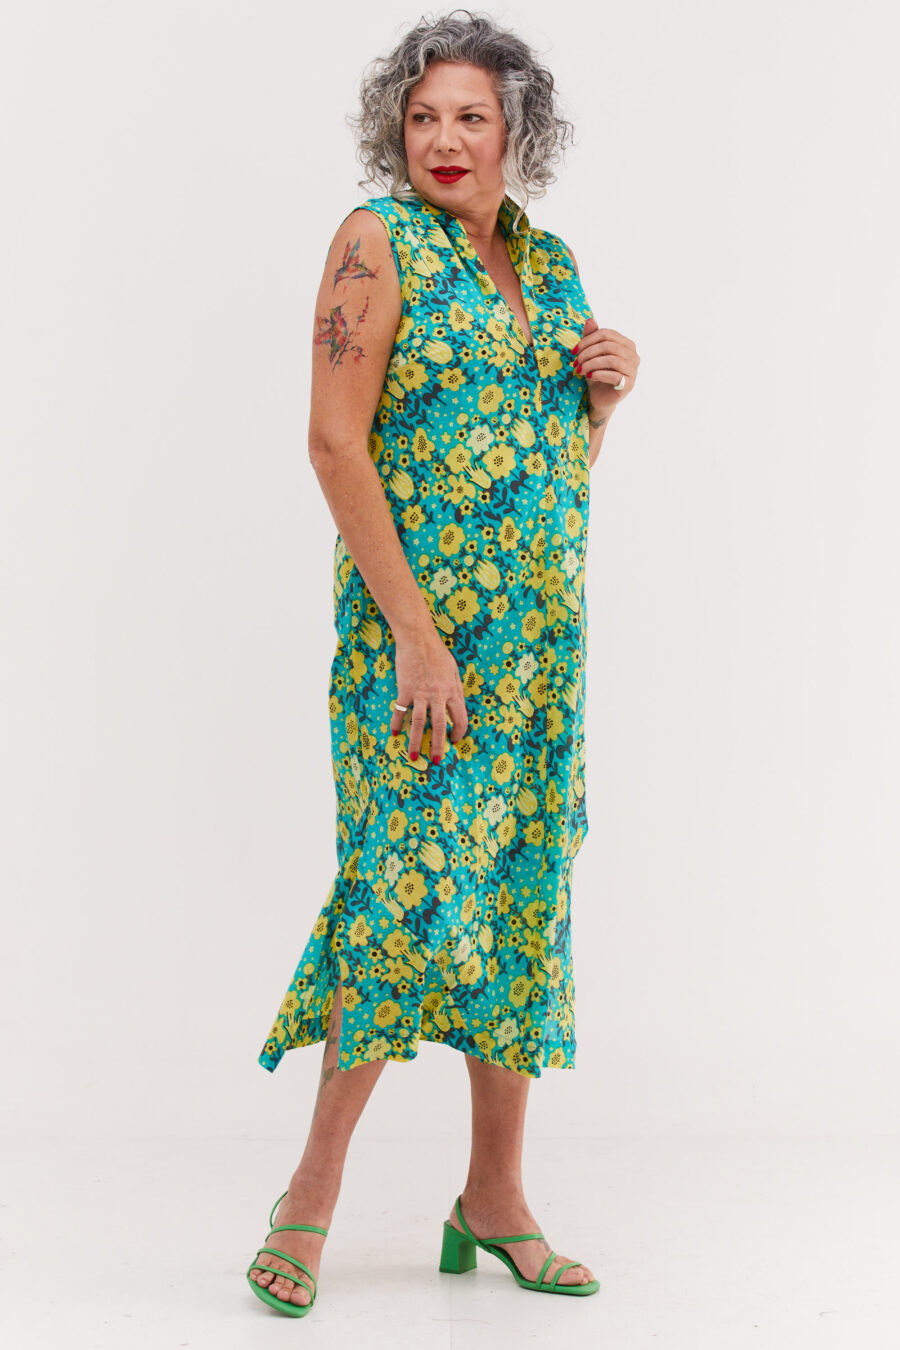 Ossi Dress | Uniquely designed dress – Optimism print, tourquise dress with yellow flowers print by comfort zone boutique.